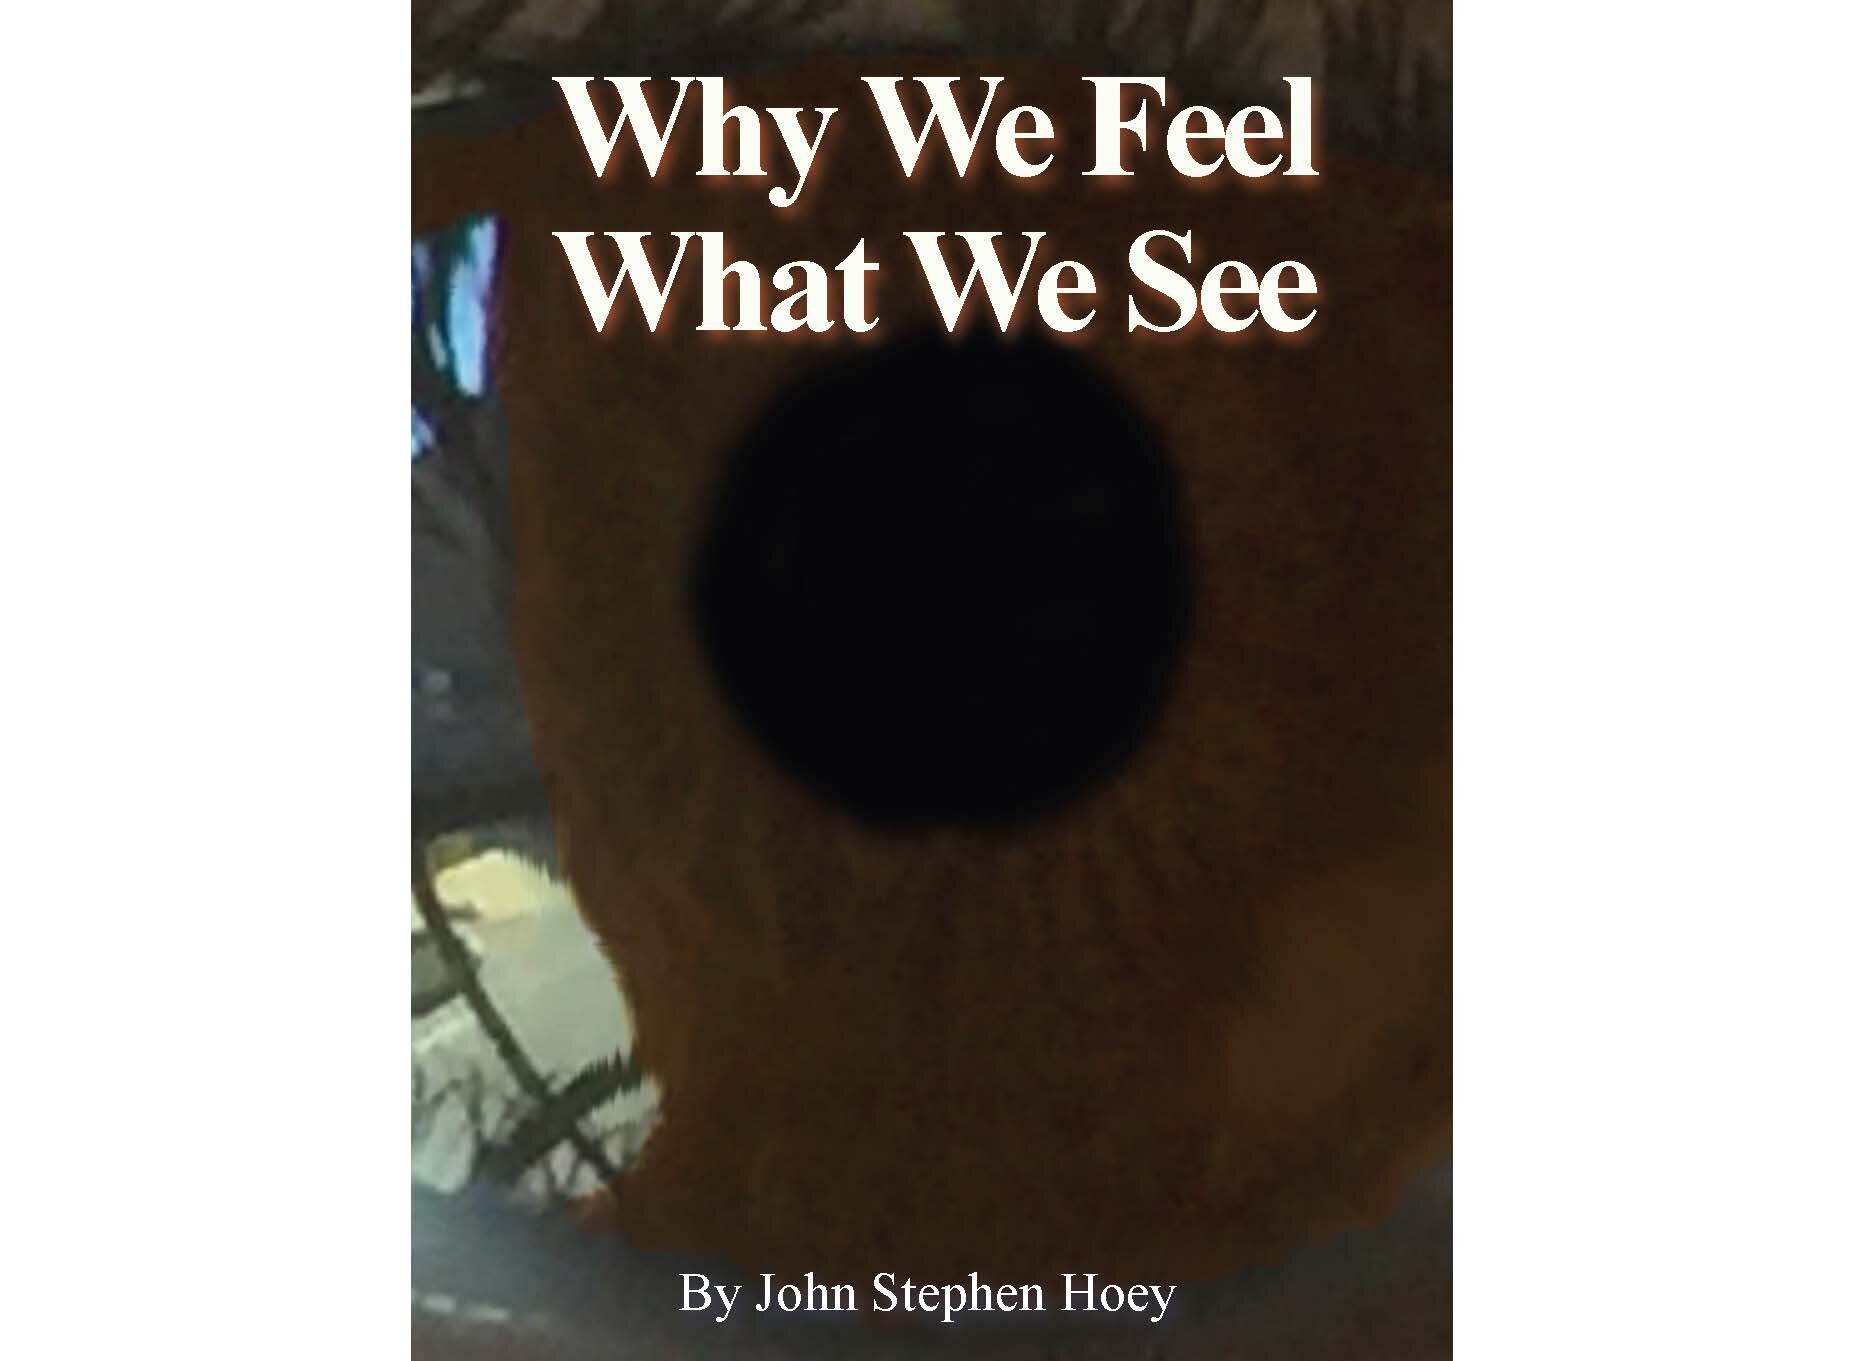 Why We Feel What We See (v3)_Page_01.jpg